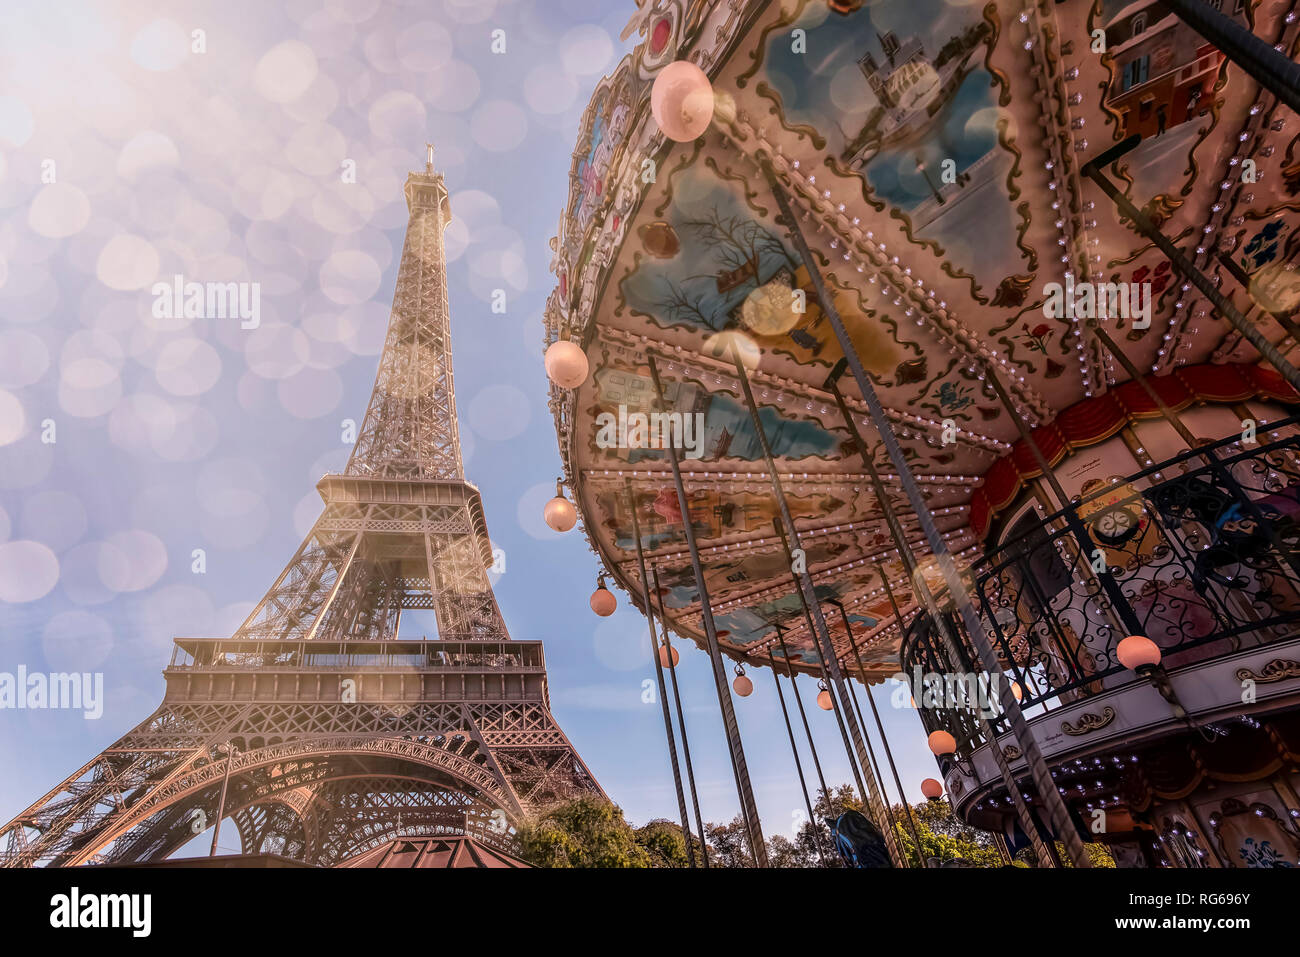 Carousel and Eiffel tower in Paris Stock Photo